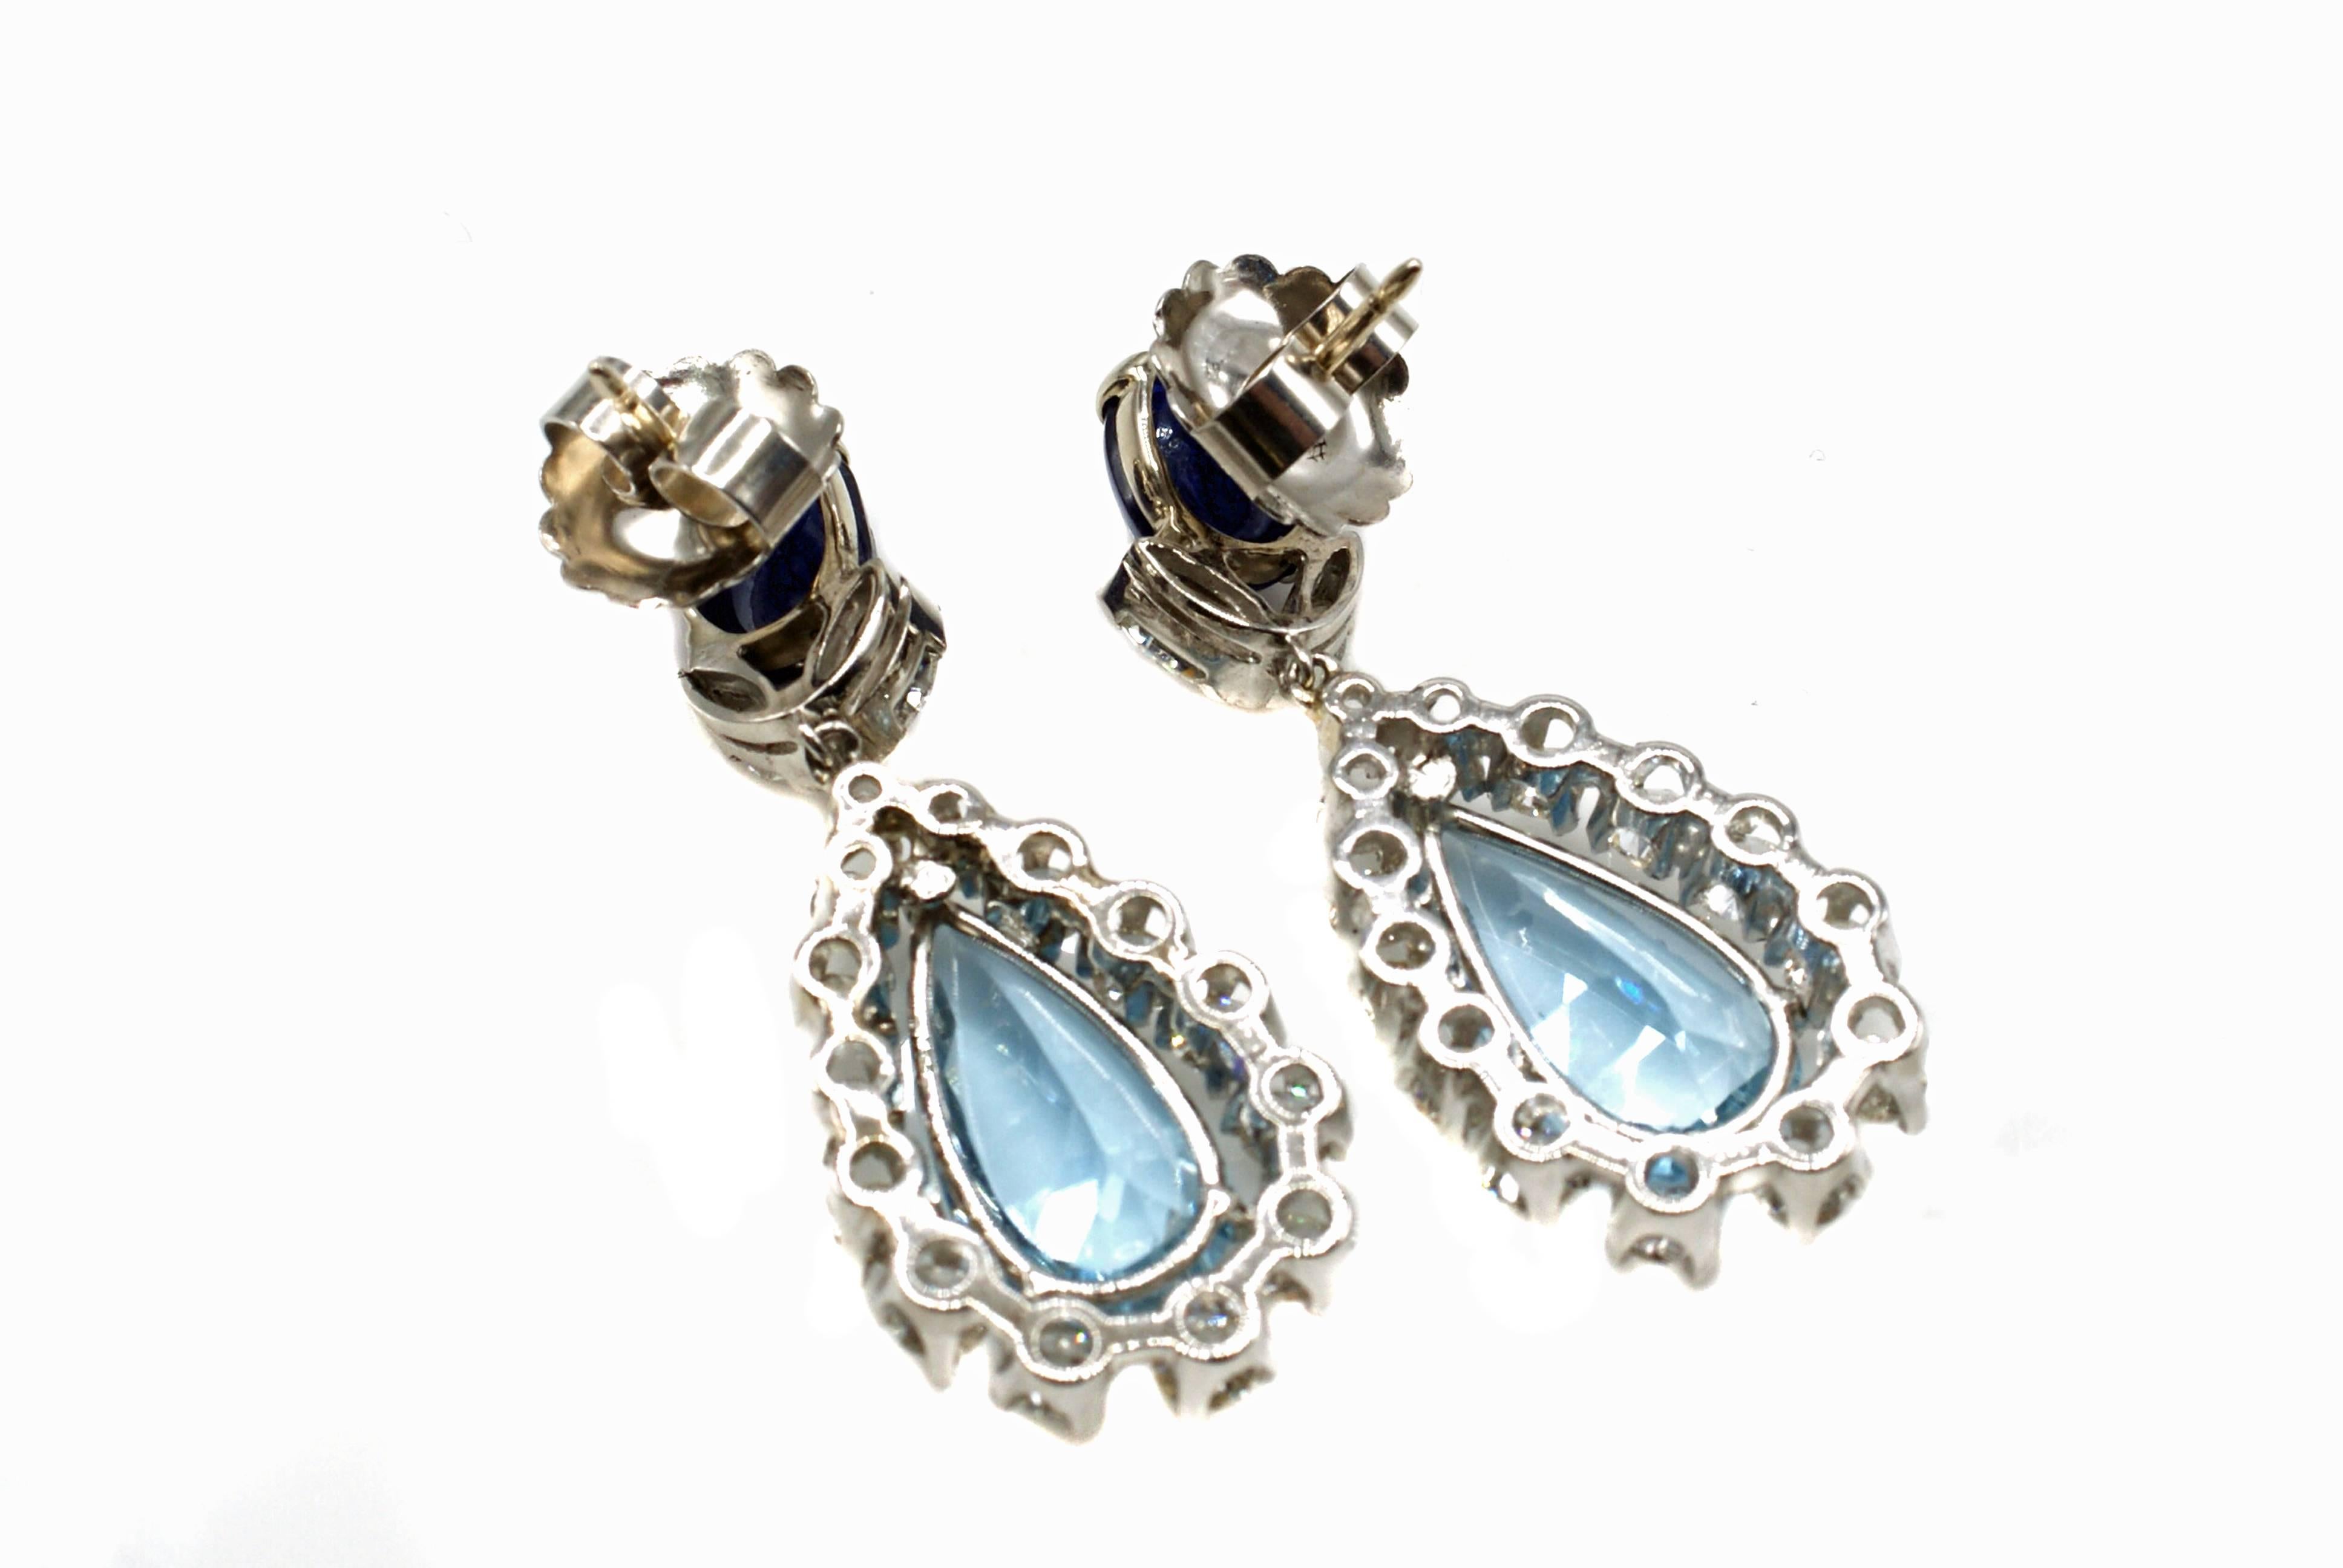 This pair of stunning and chic hand-crafted platinum earrings from ca. 1940 are set with 2 Burma no-heat cabochon sapphires on the top of the and 2 lively and brilliant sky-blue pear-shape aquamarines on the bottom. The certified sapphires have a